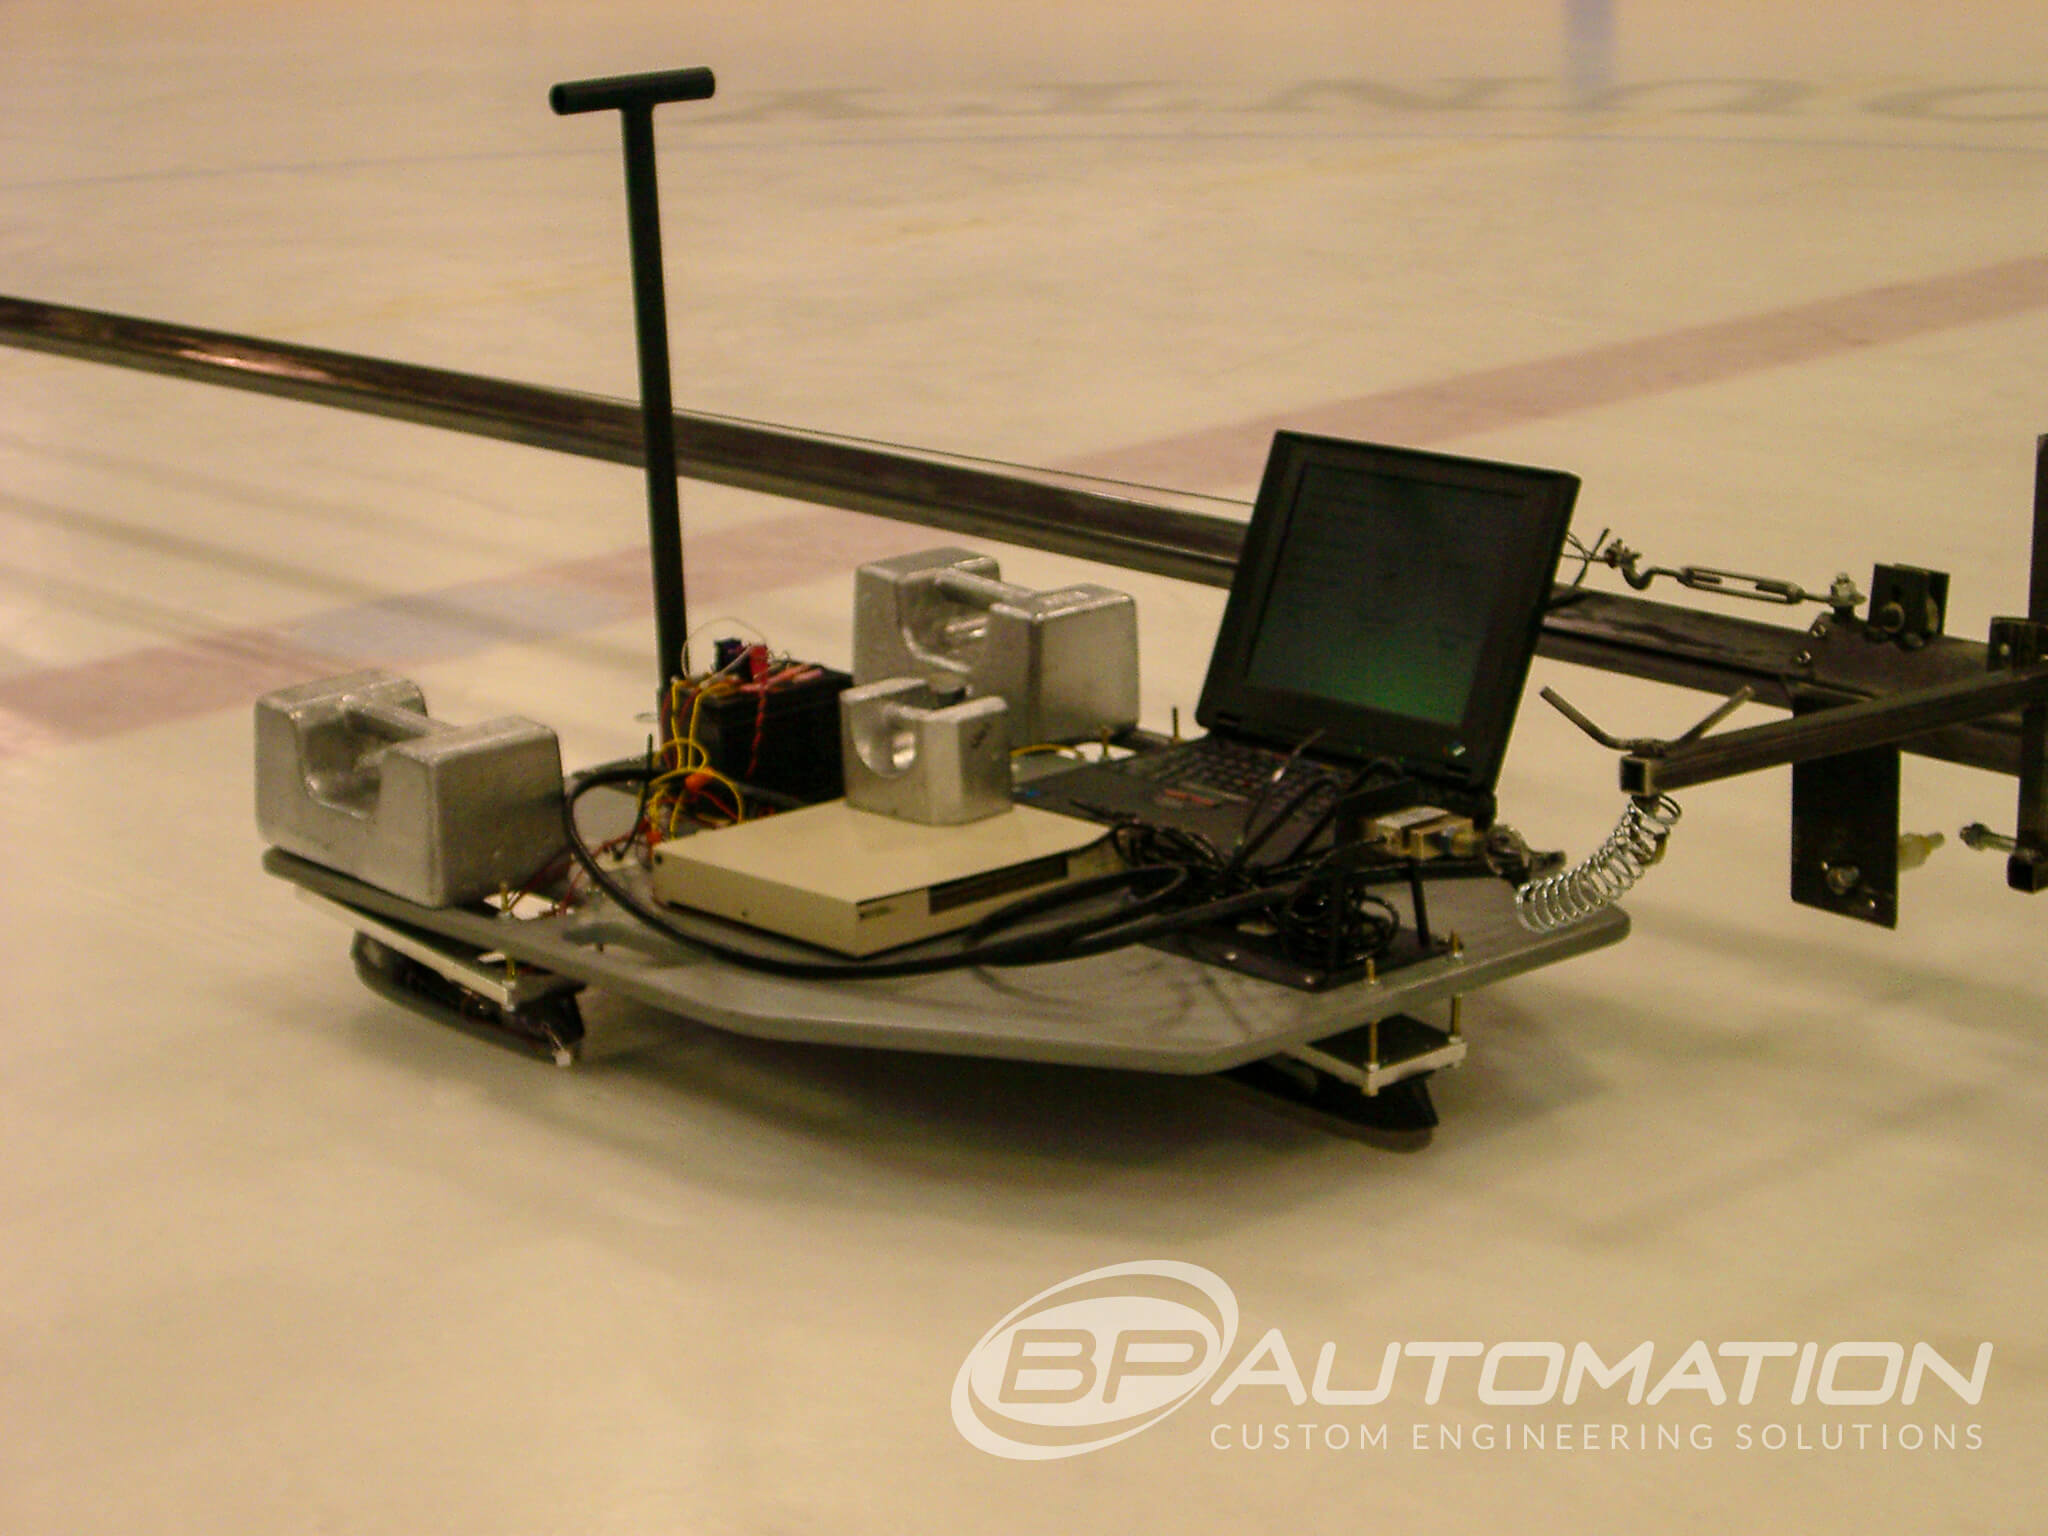 ELECTRIC-SKATE-TEST-FIXTURE